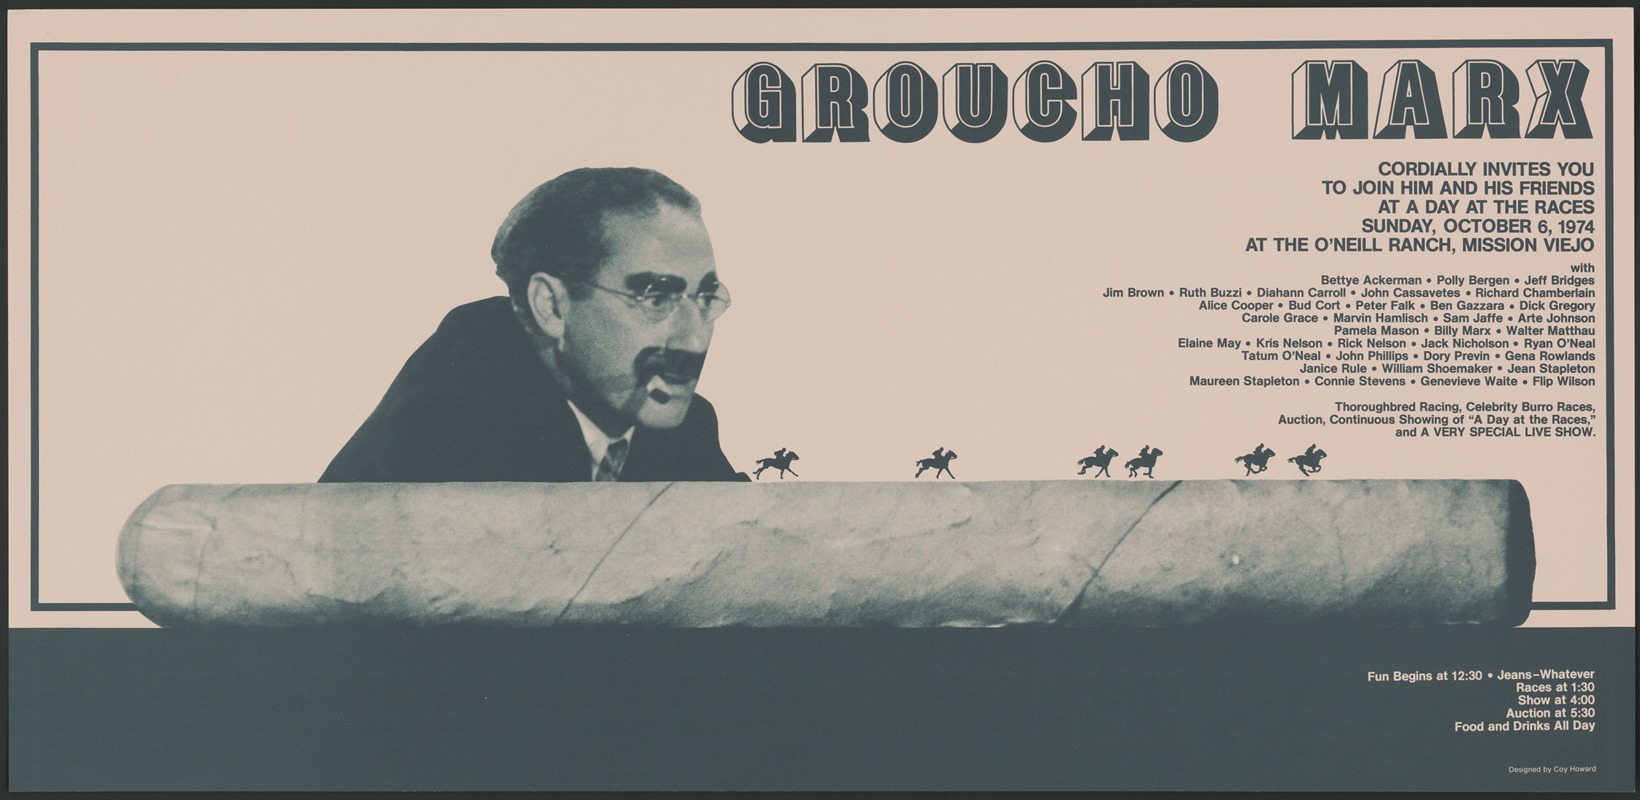 Coy Howard - Groucho Marx cordially invites you to join him and his friends at a day at the races